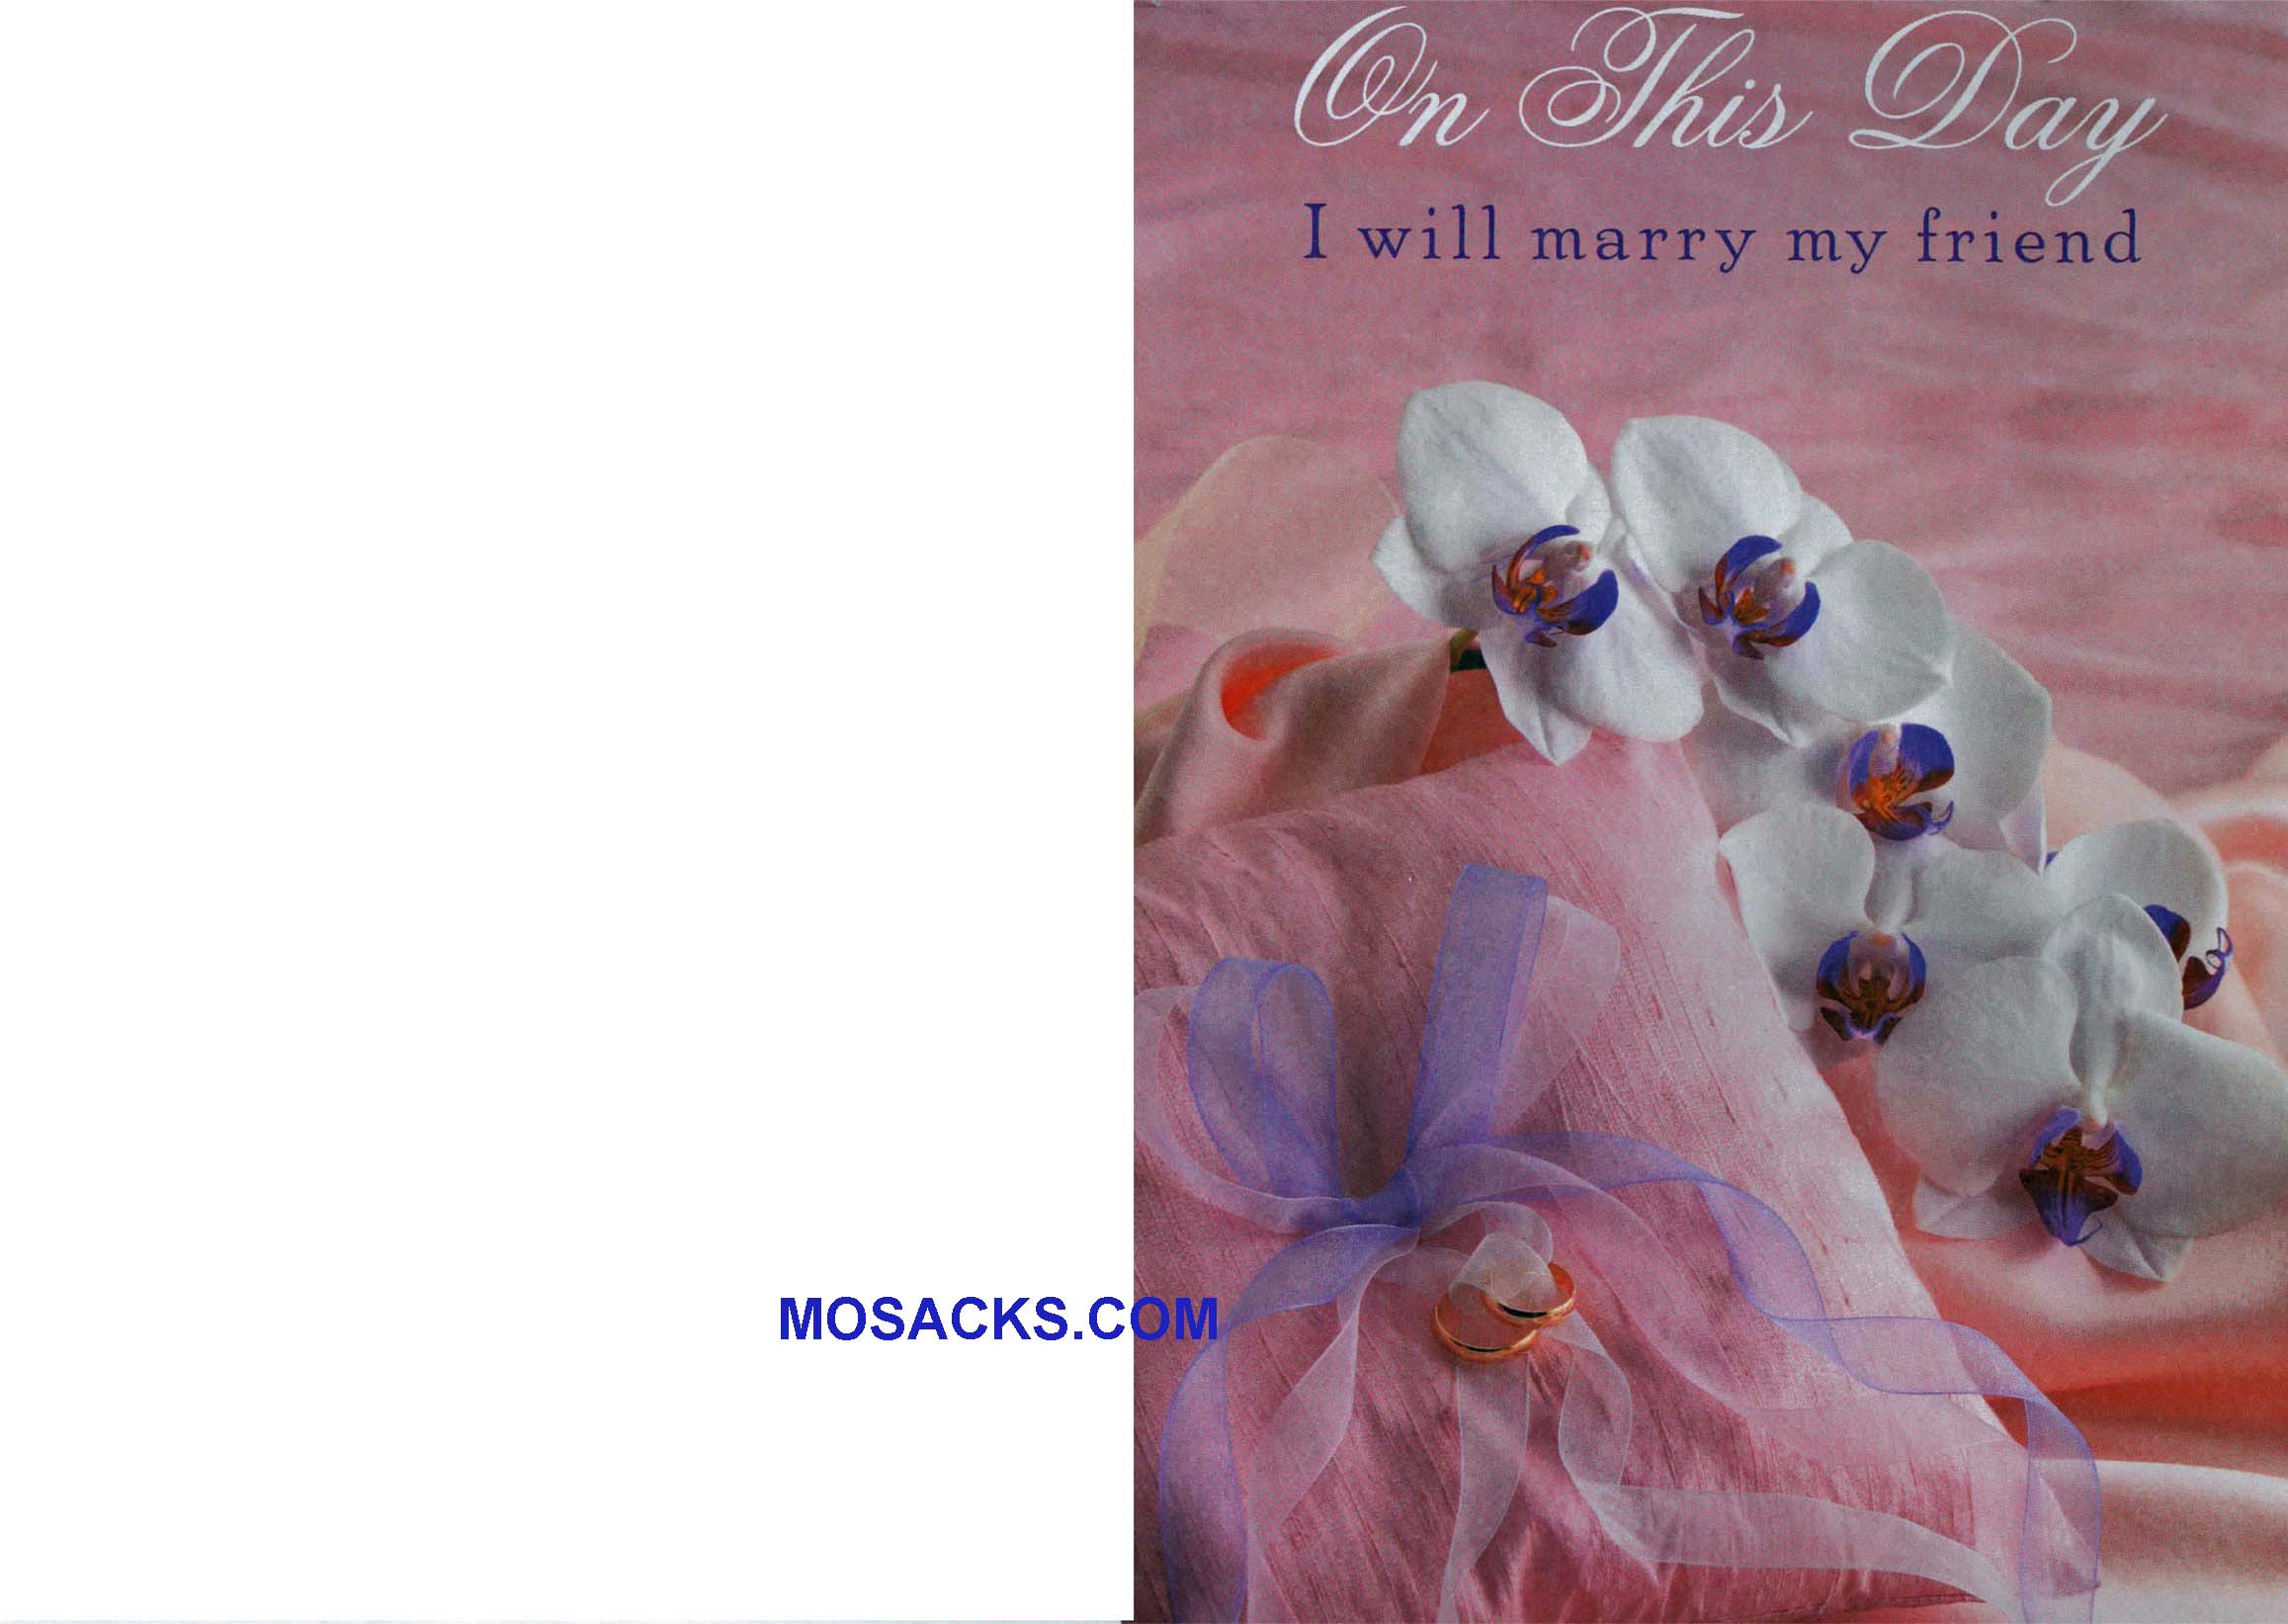 Marriage Bulletin Cover On This Day I Will Marry My Friend100 Pack-9311, Wedding Cover